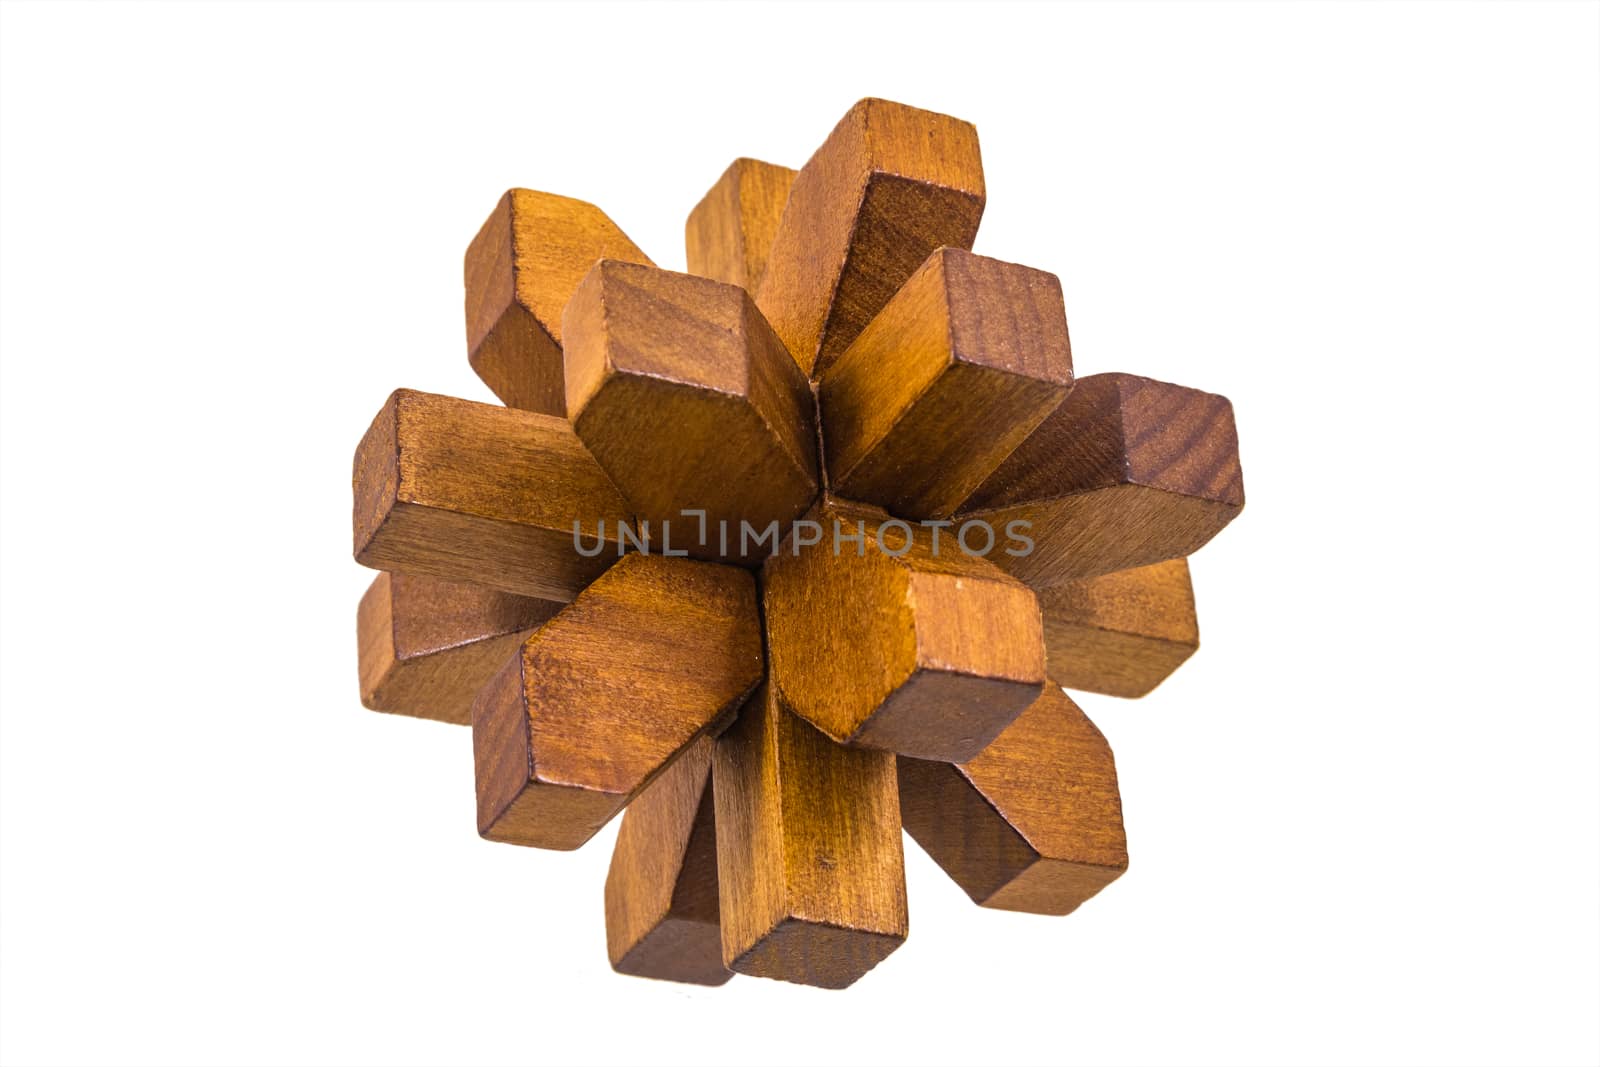 Wooden assembled flower shaped puzzle game by huntz